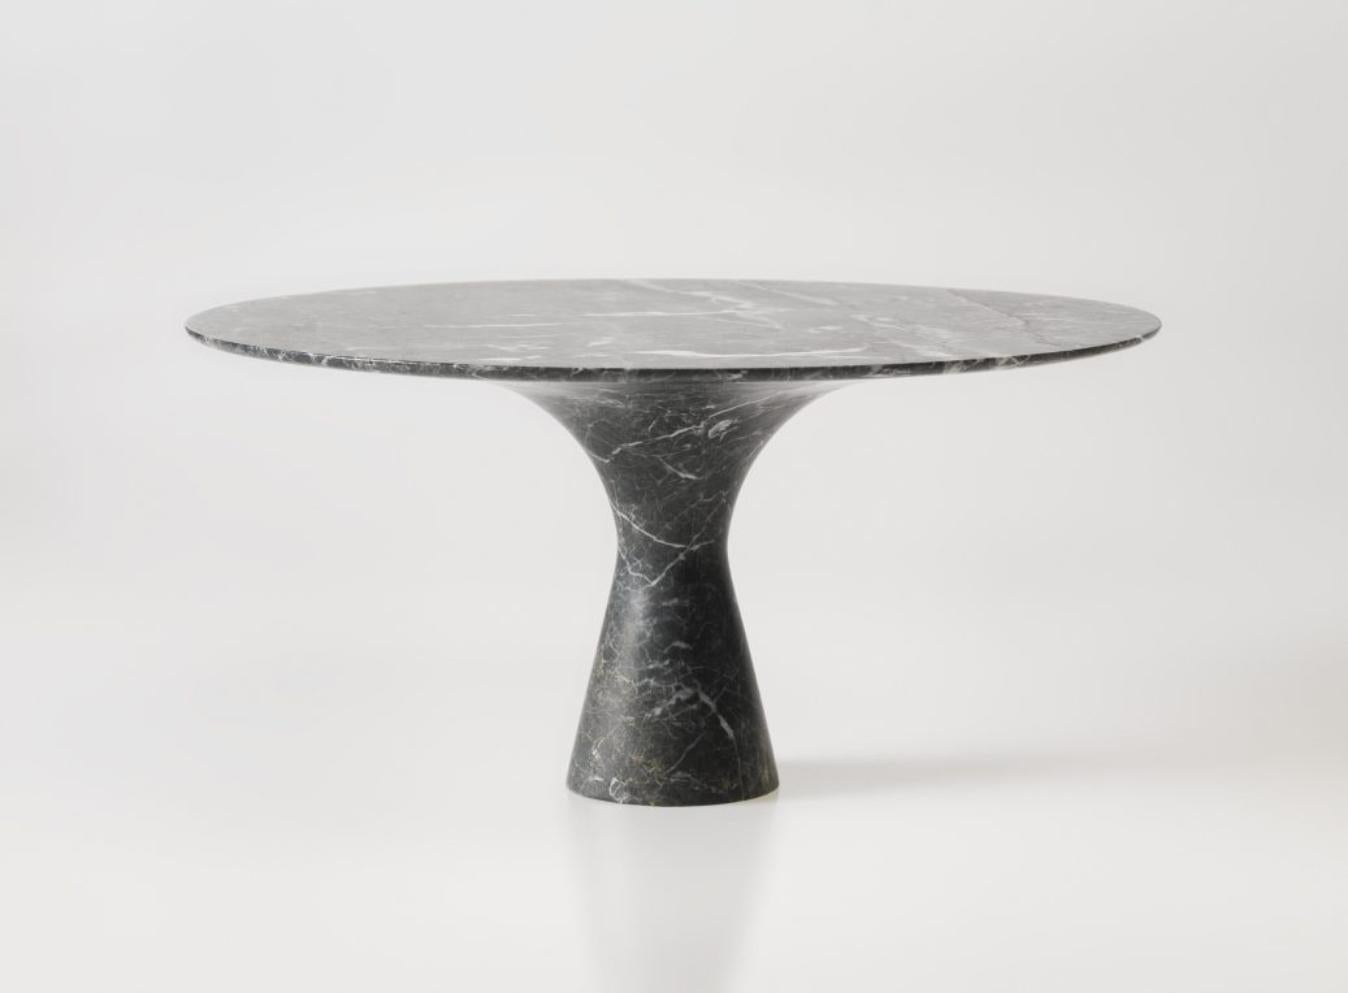 Post-Modern Port Saint Laurent Refined Contemporary Marble Dining Table 160/75